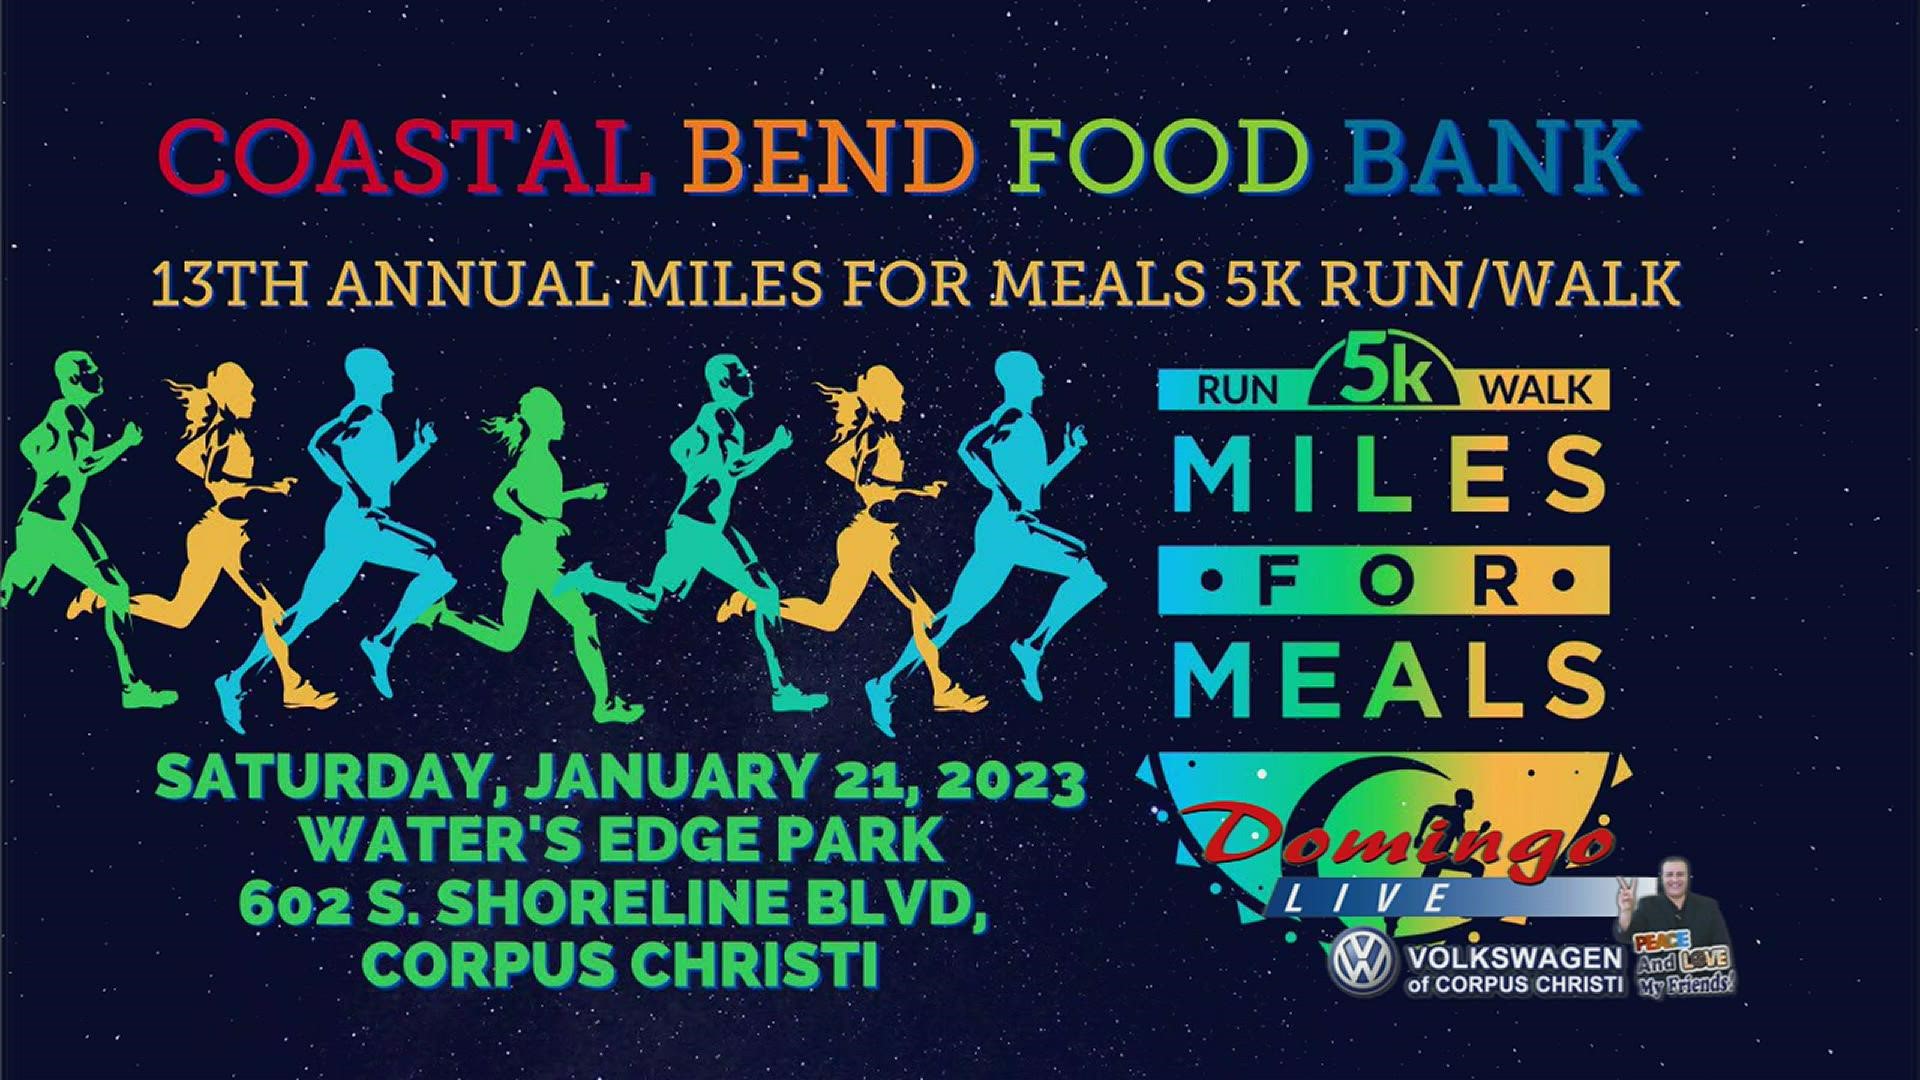 The Coastal Bend Food Bank's Bea Hanson joined us live to talk about the 13th Annual Miles for Meals 5k Run-Walk event at Water's Edge Park on Jan. 21.